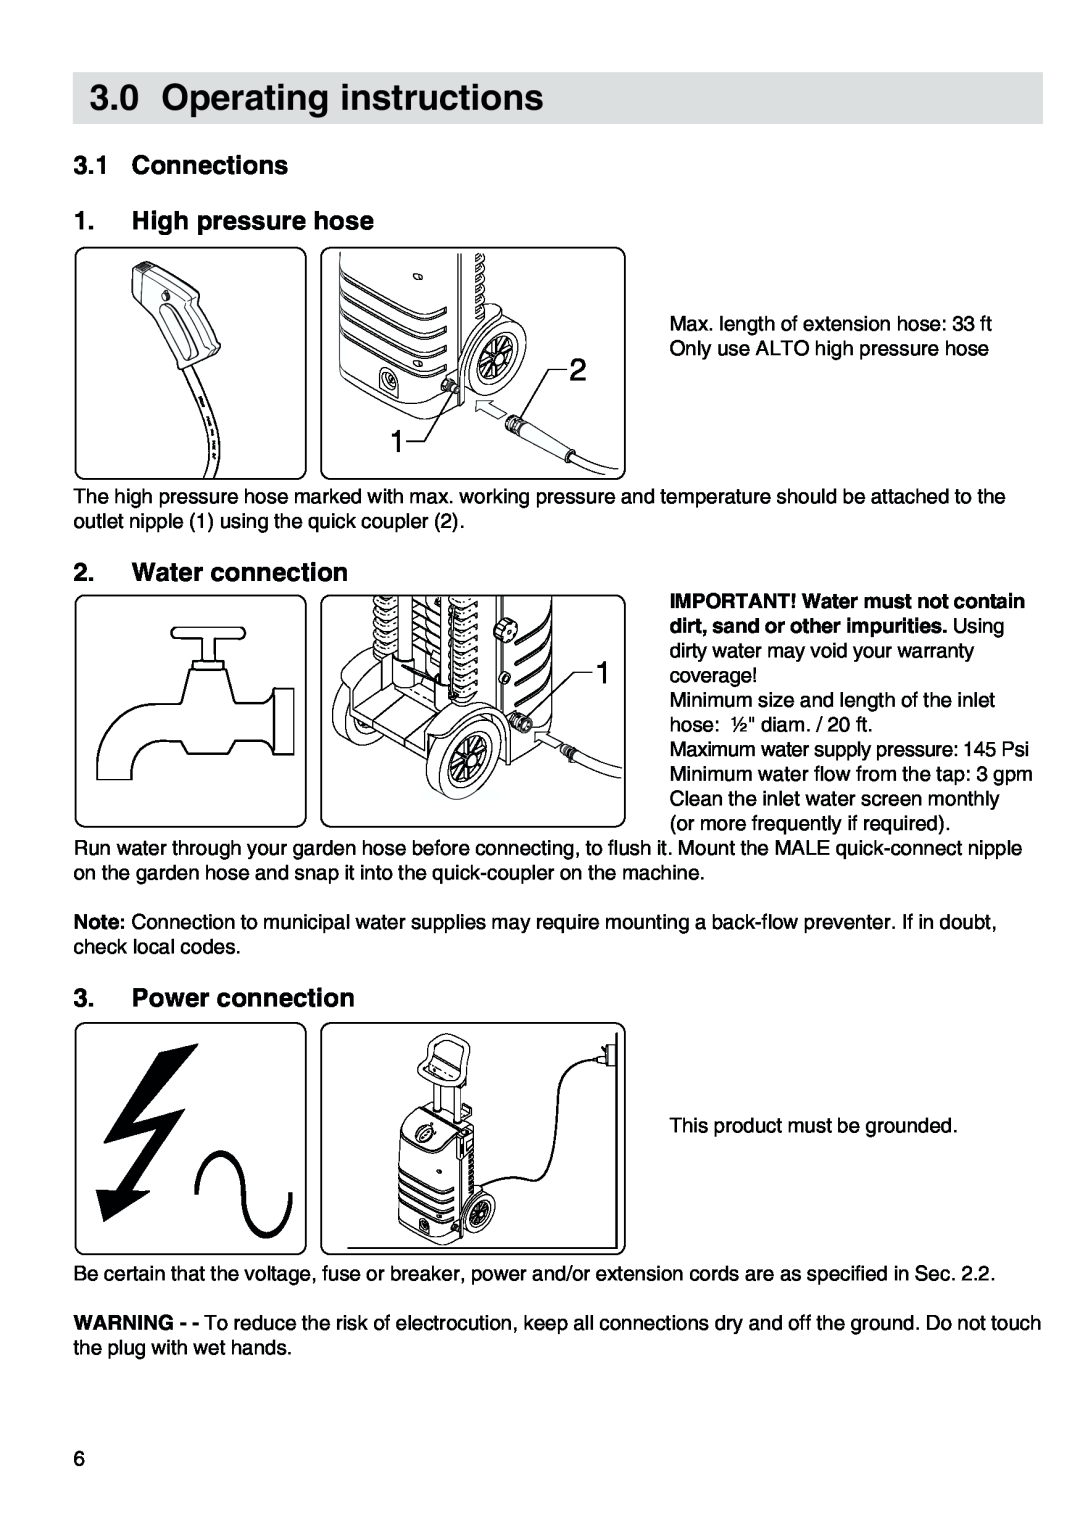 Nilfisk-ALTO 30CA COMPACT I Operating instructions, Connections 1. High pressure hose, Water connection, Power connection 